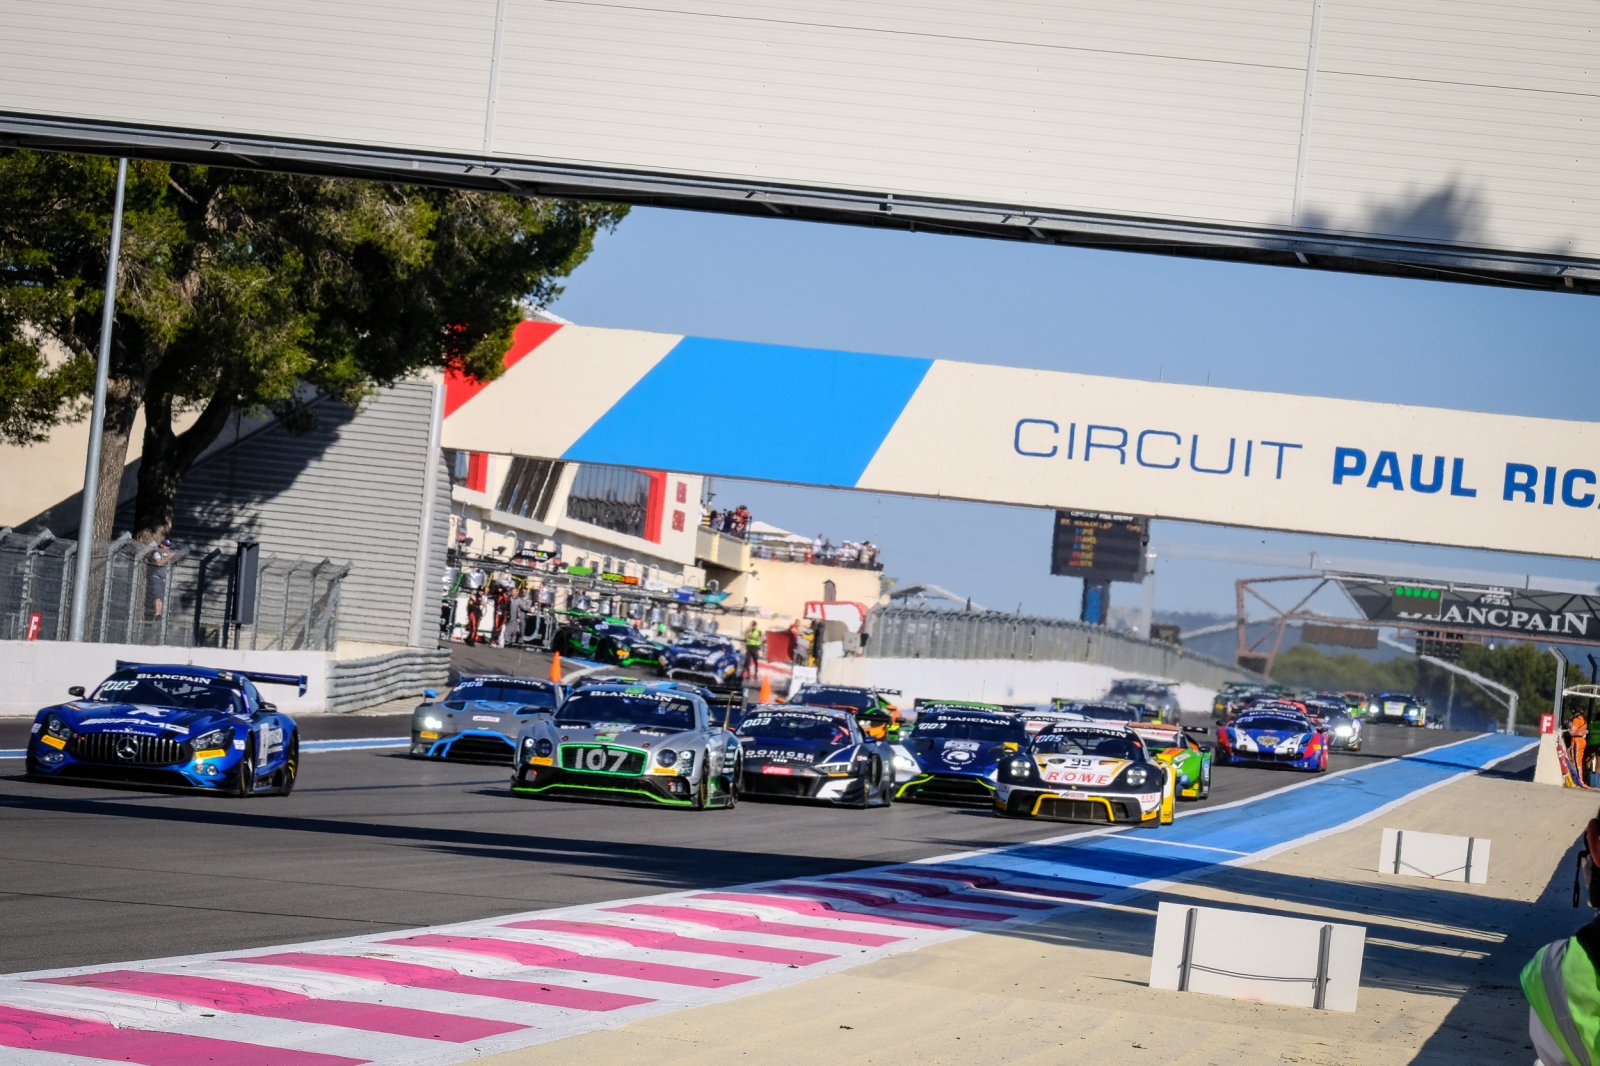 GT World Challenge Europe Powered by AWS moves Circuit Paul Ricard 1000Km event to November 